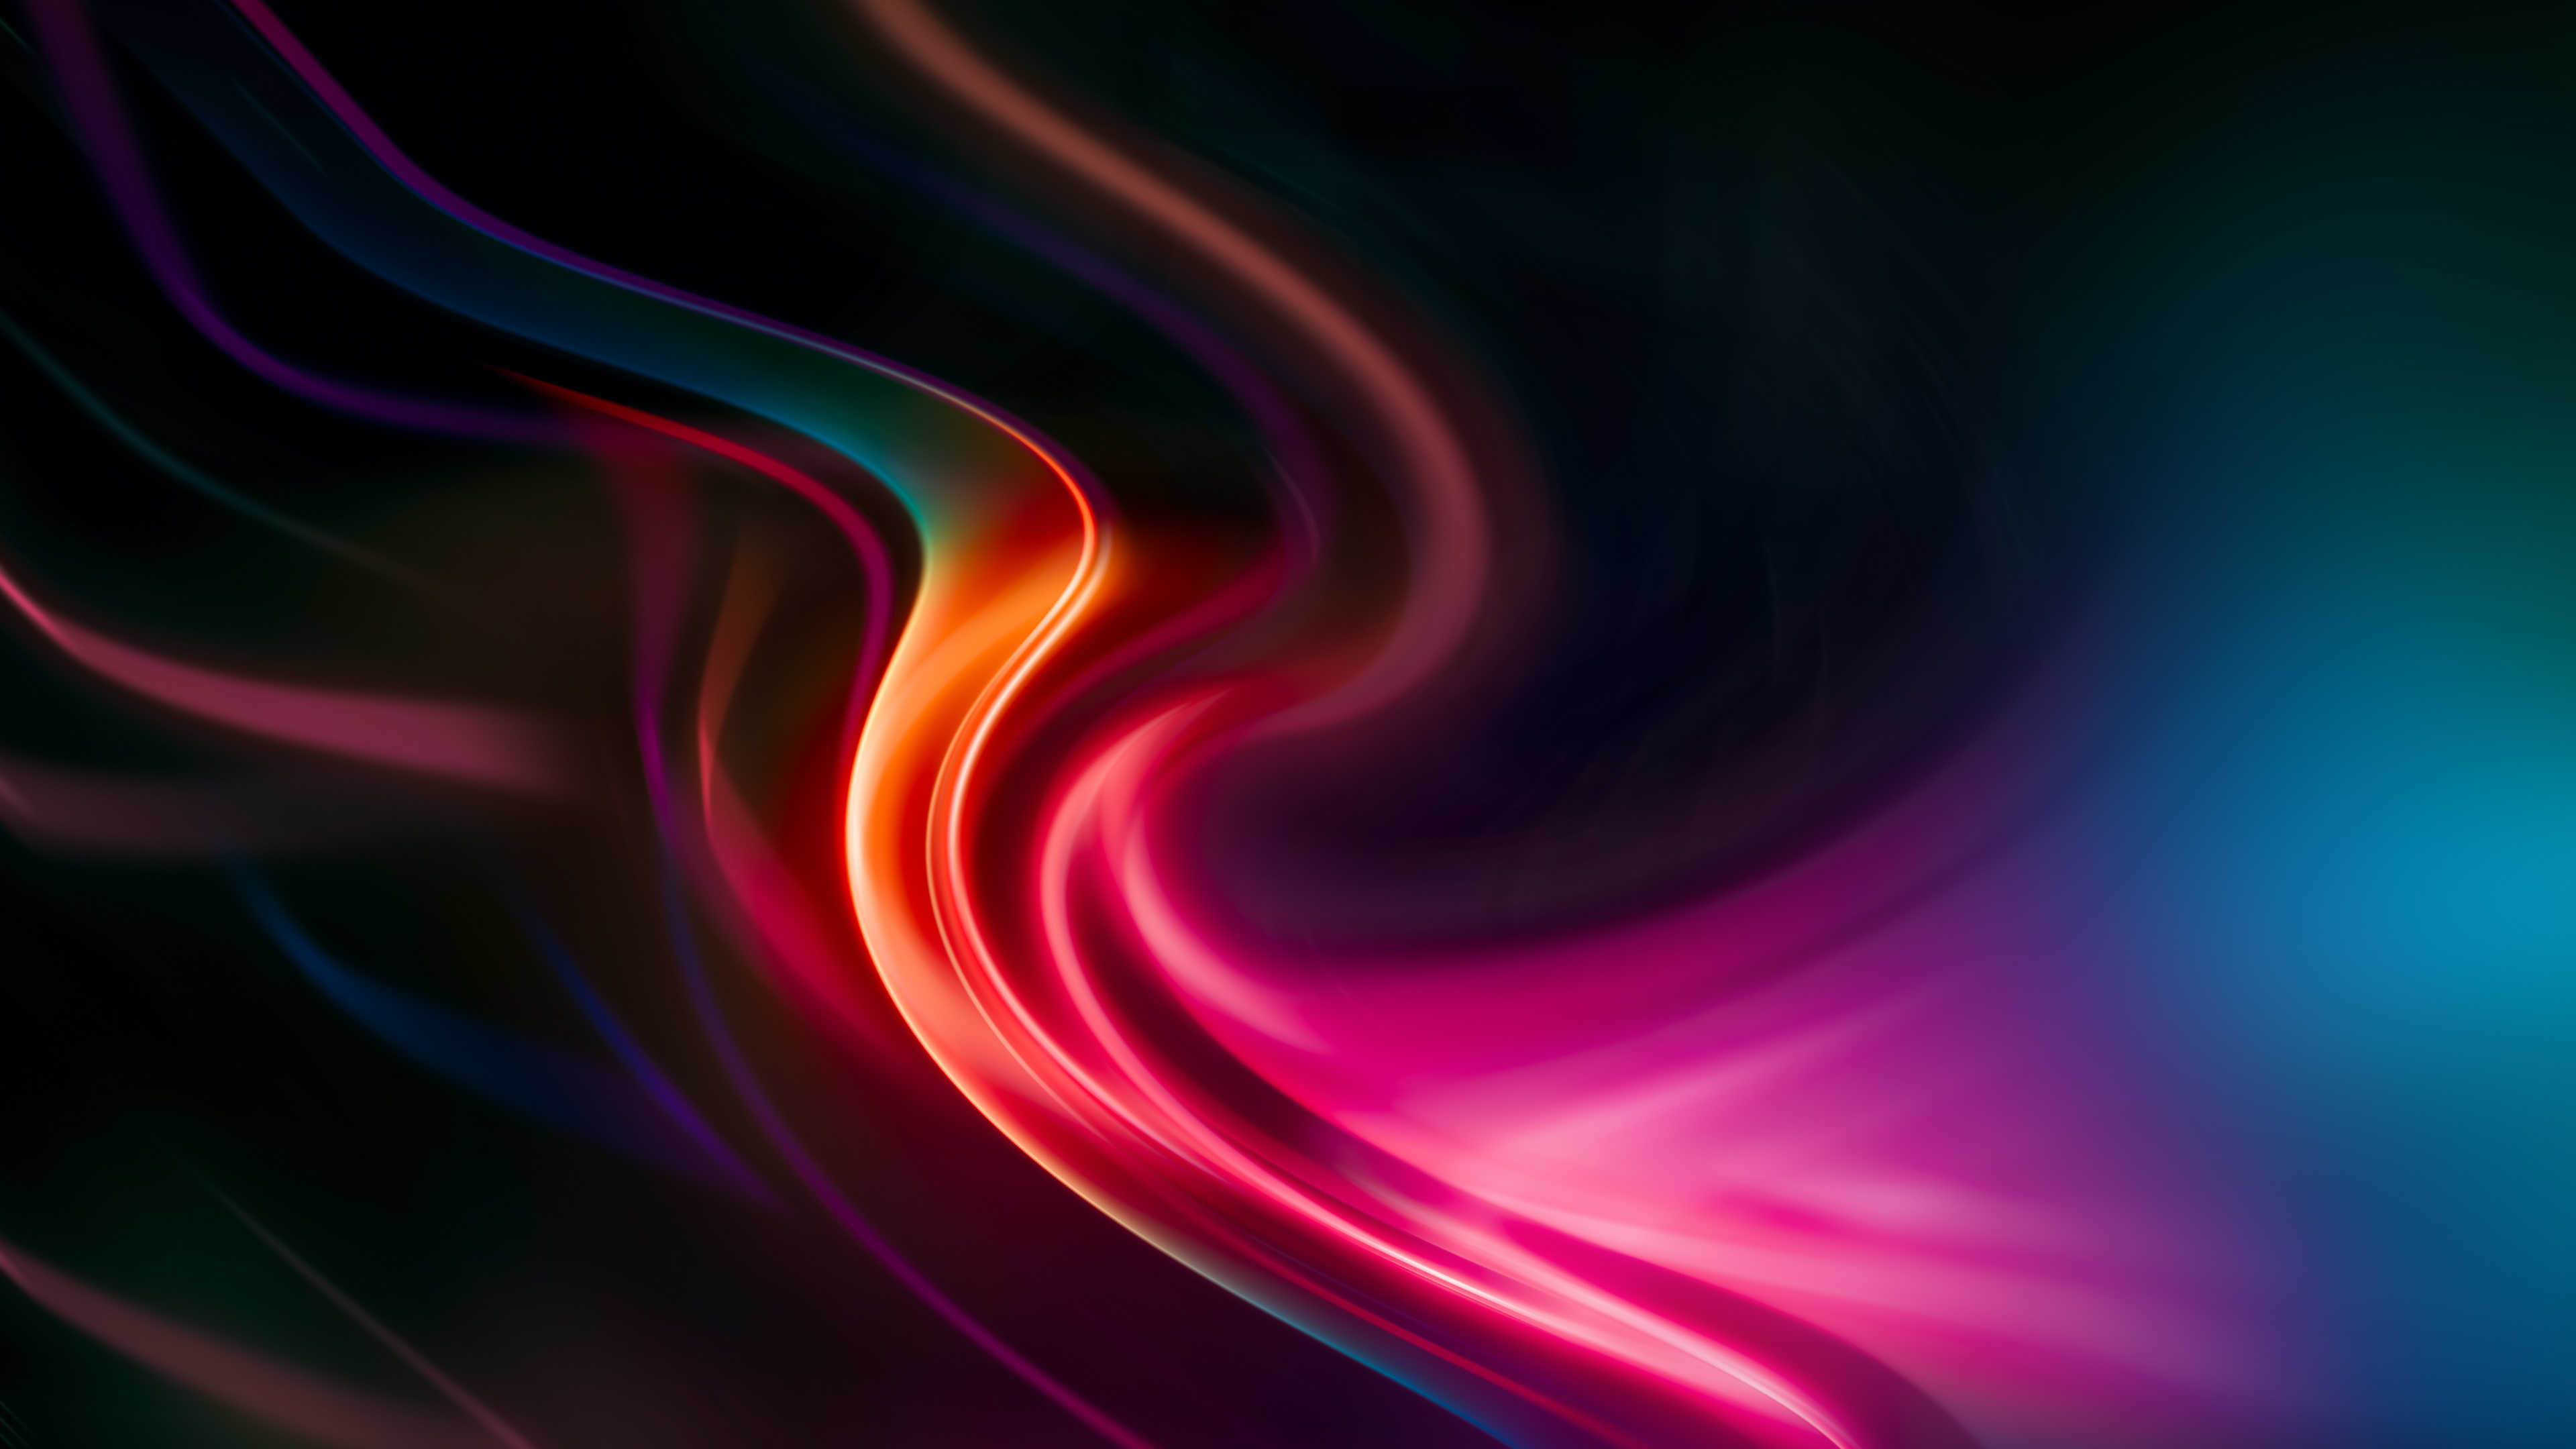 Graphic: Visualization, Visual explanation of a text, Digital art, Colorful waves. 3840x2160 4K Wallpaper.